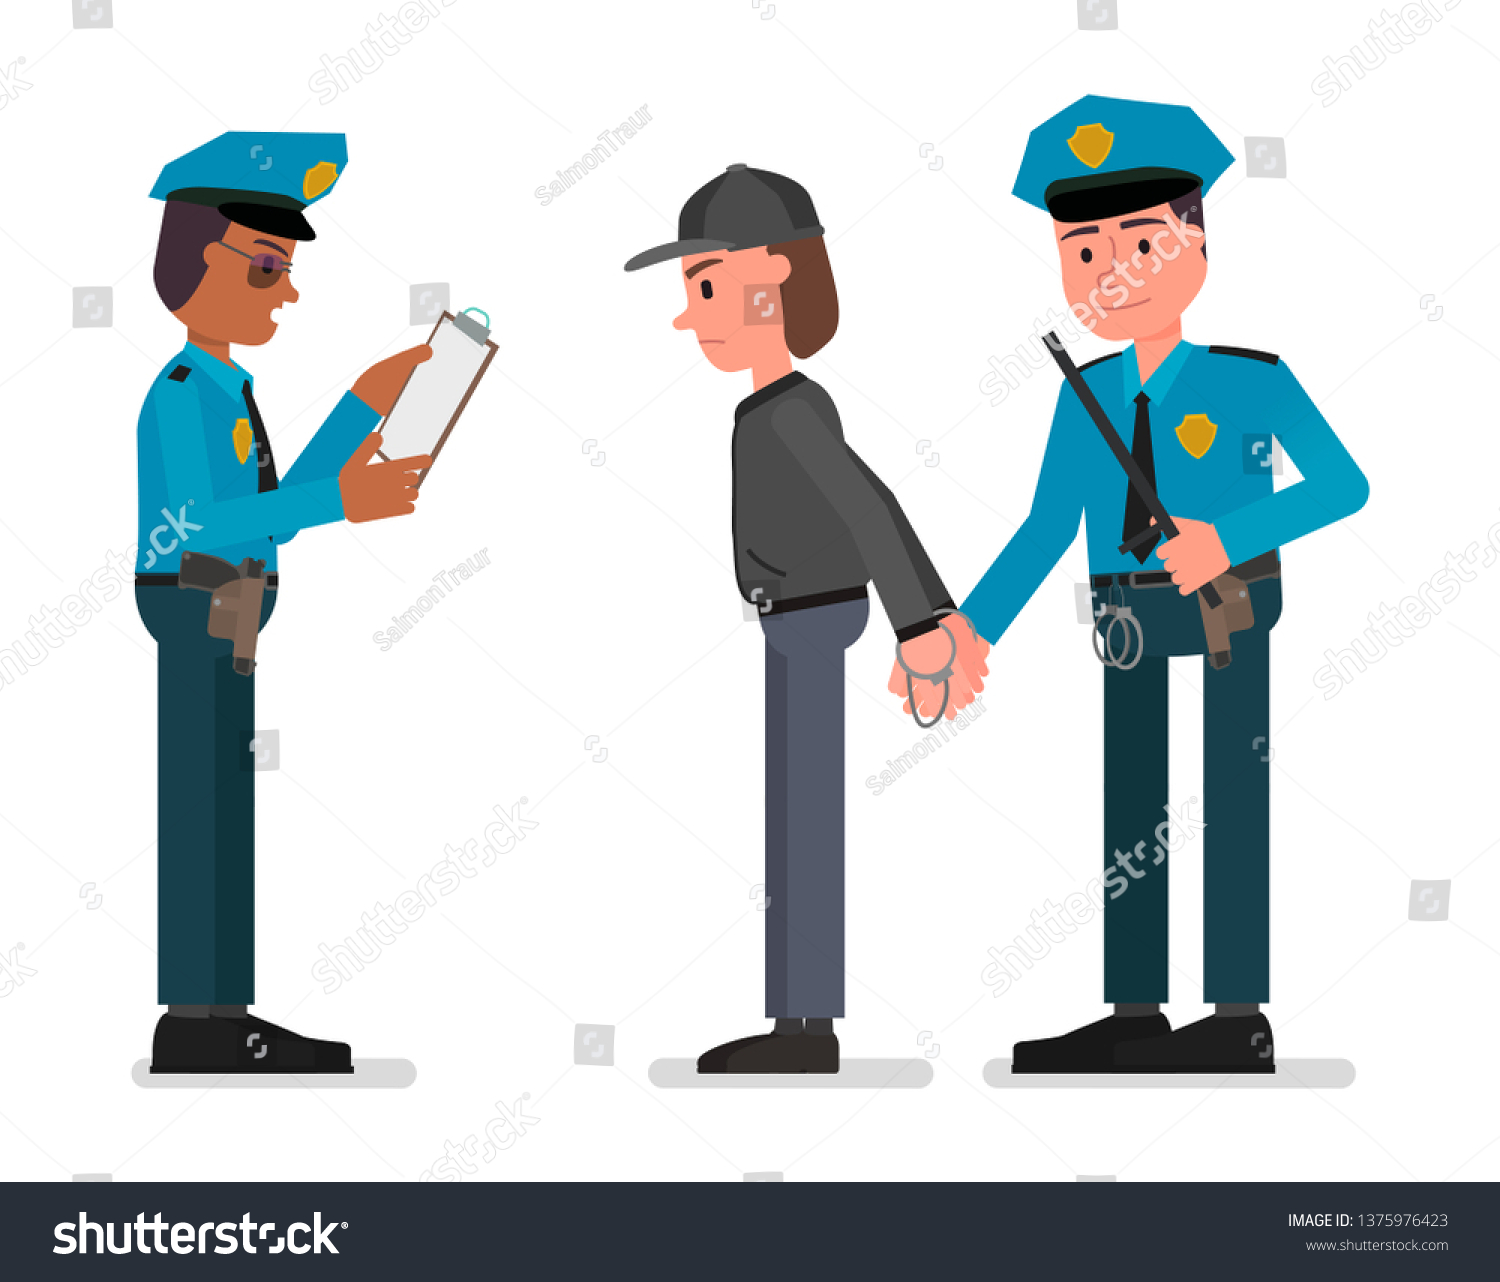 Police arrest a suspect. Vector stock illustration, flat style drawing. Isolated on a white background.